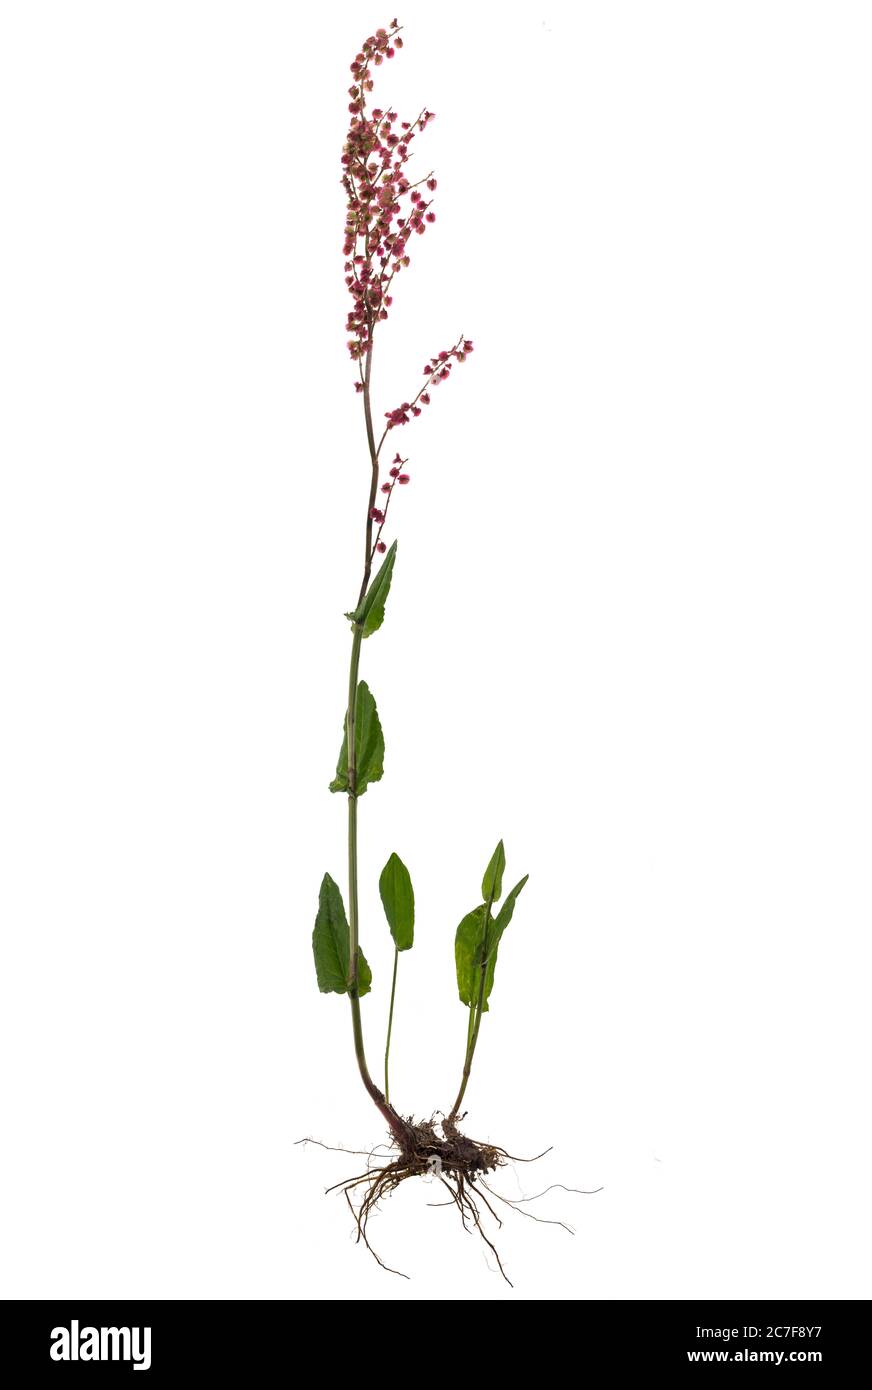 Common sorrel (Rumex acetosa) on white background, plant with flower and root, Germany Stock Photo